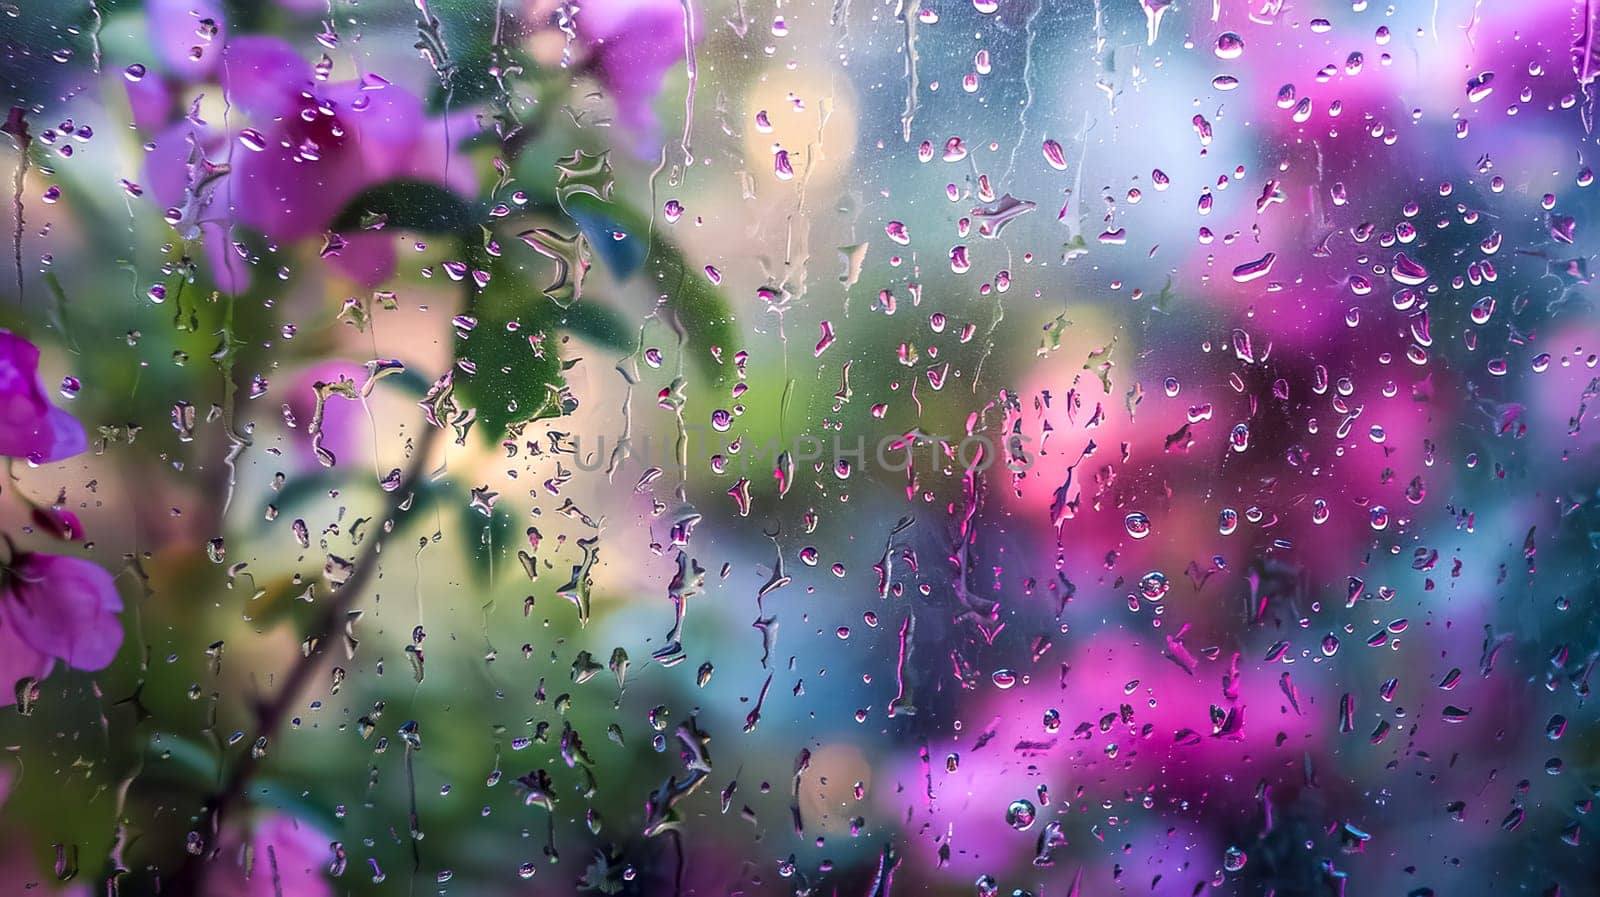 Close-up of water droplets on a window with colorful out-of-focus flowers in the background